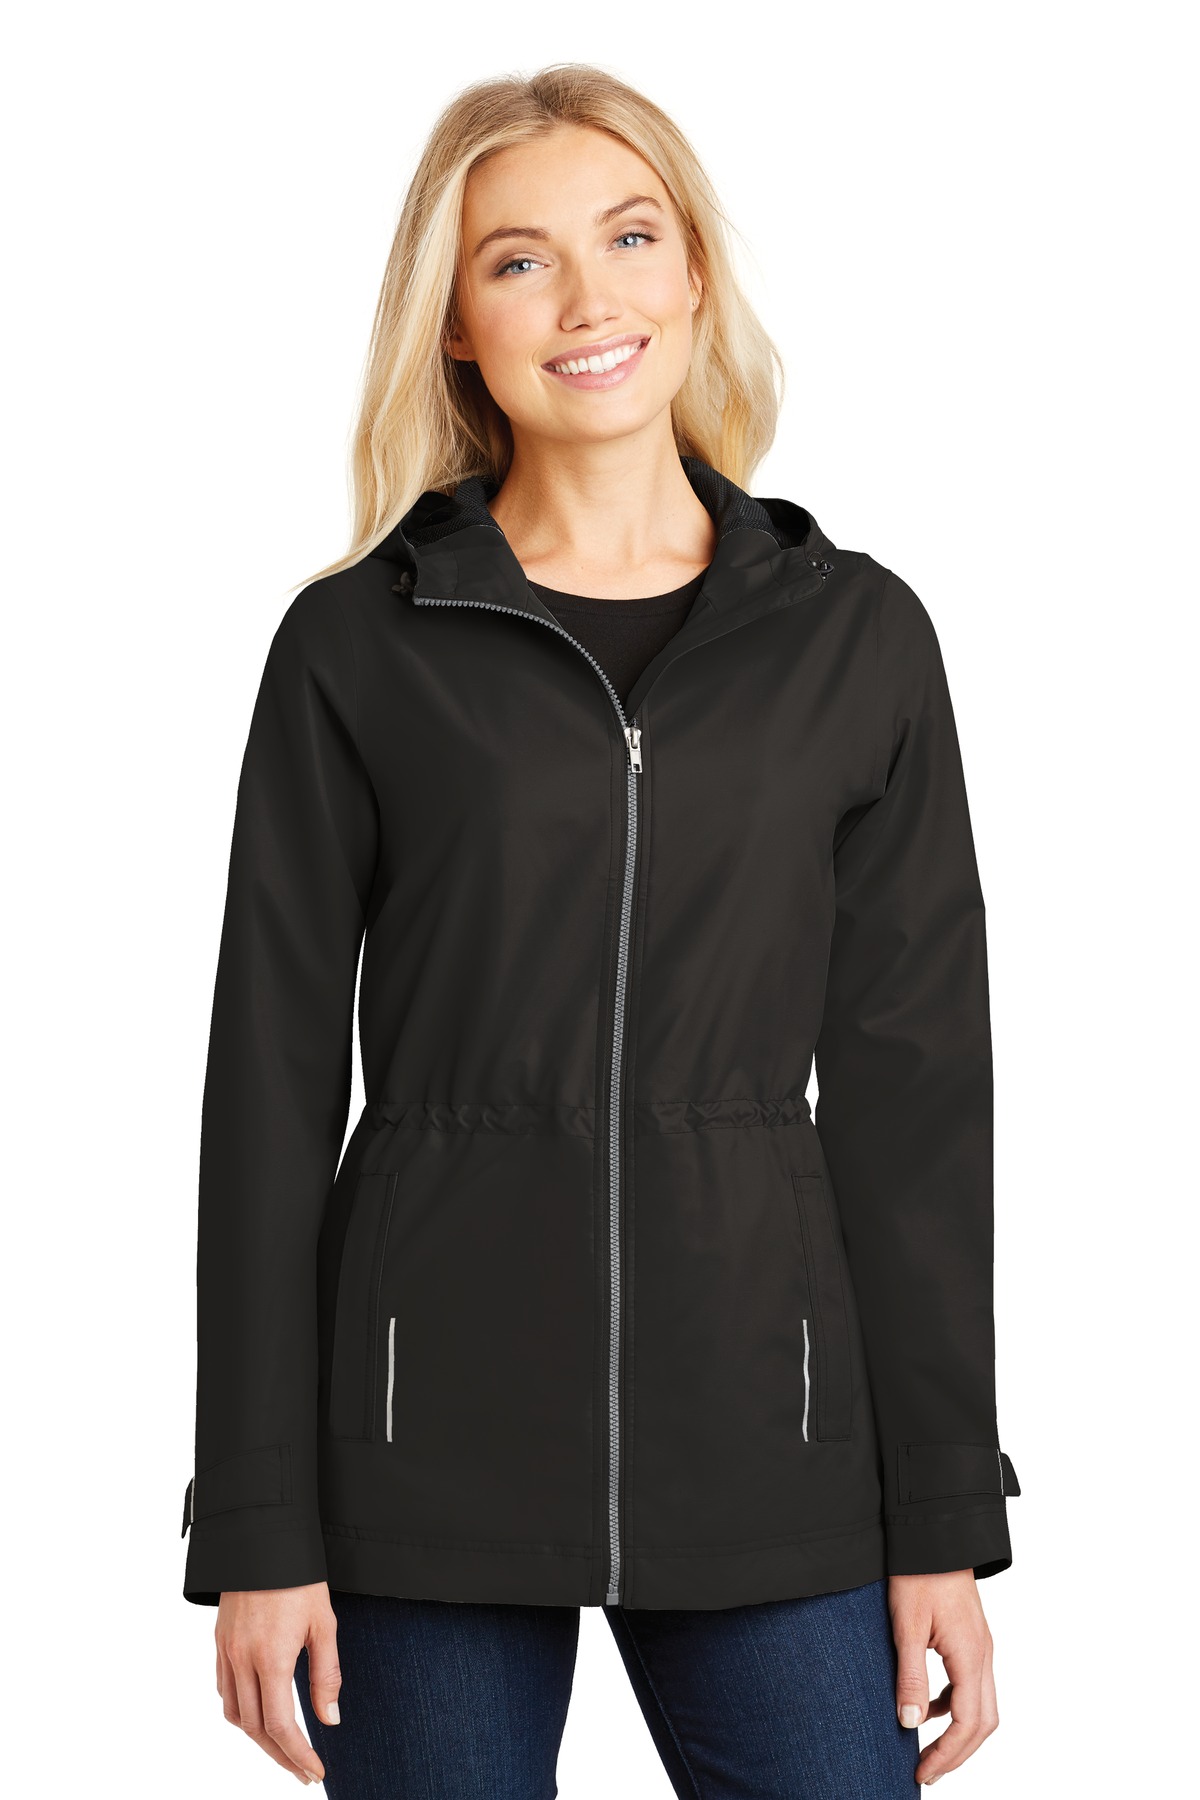 Port Authority Ladies Outerwear for Hospitality ® Ladies Northwest Slicker.-Port Authority